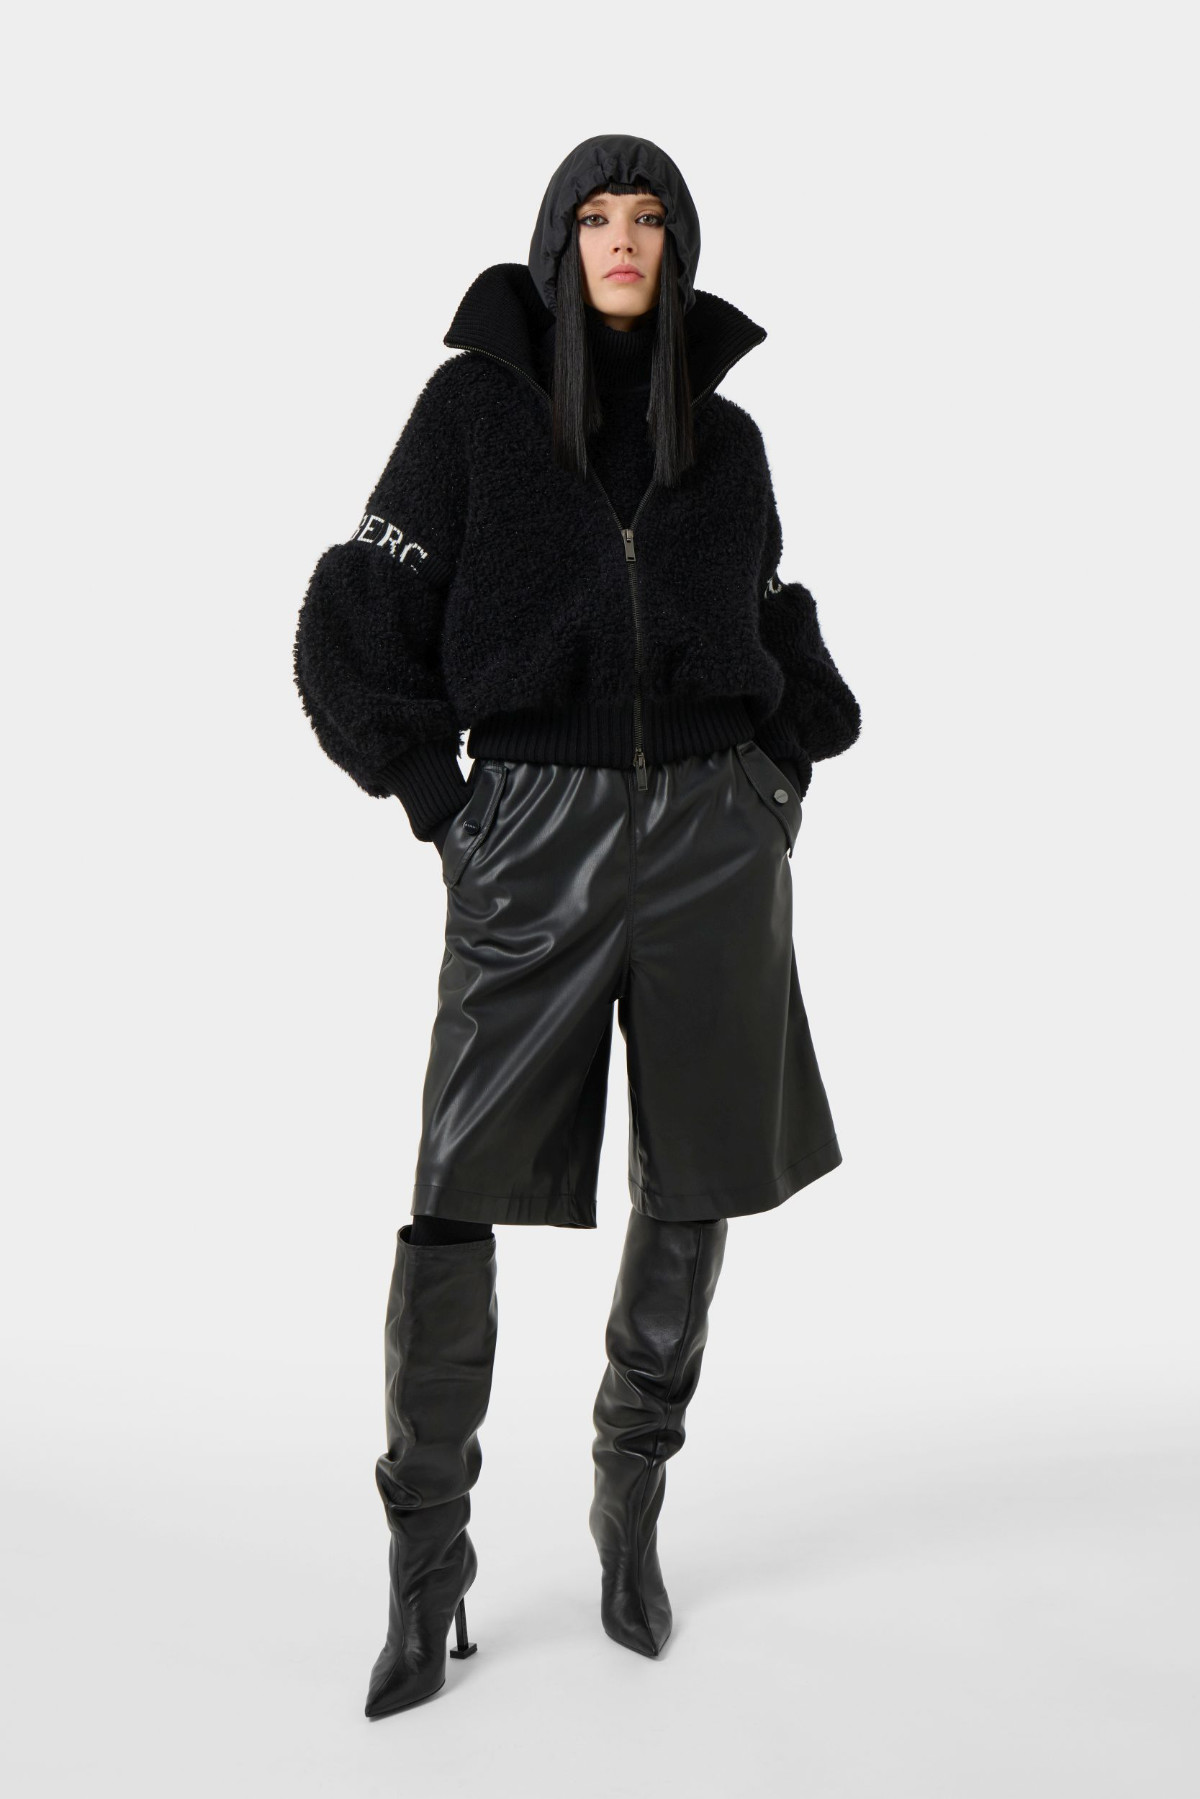 Iceberg Takes Its Fall-Winter Show Collection 2022-23 To The Streets